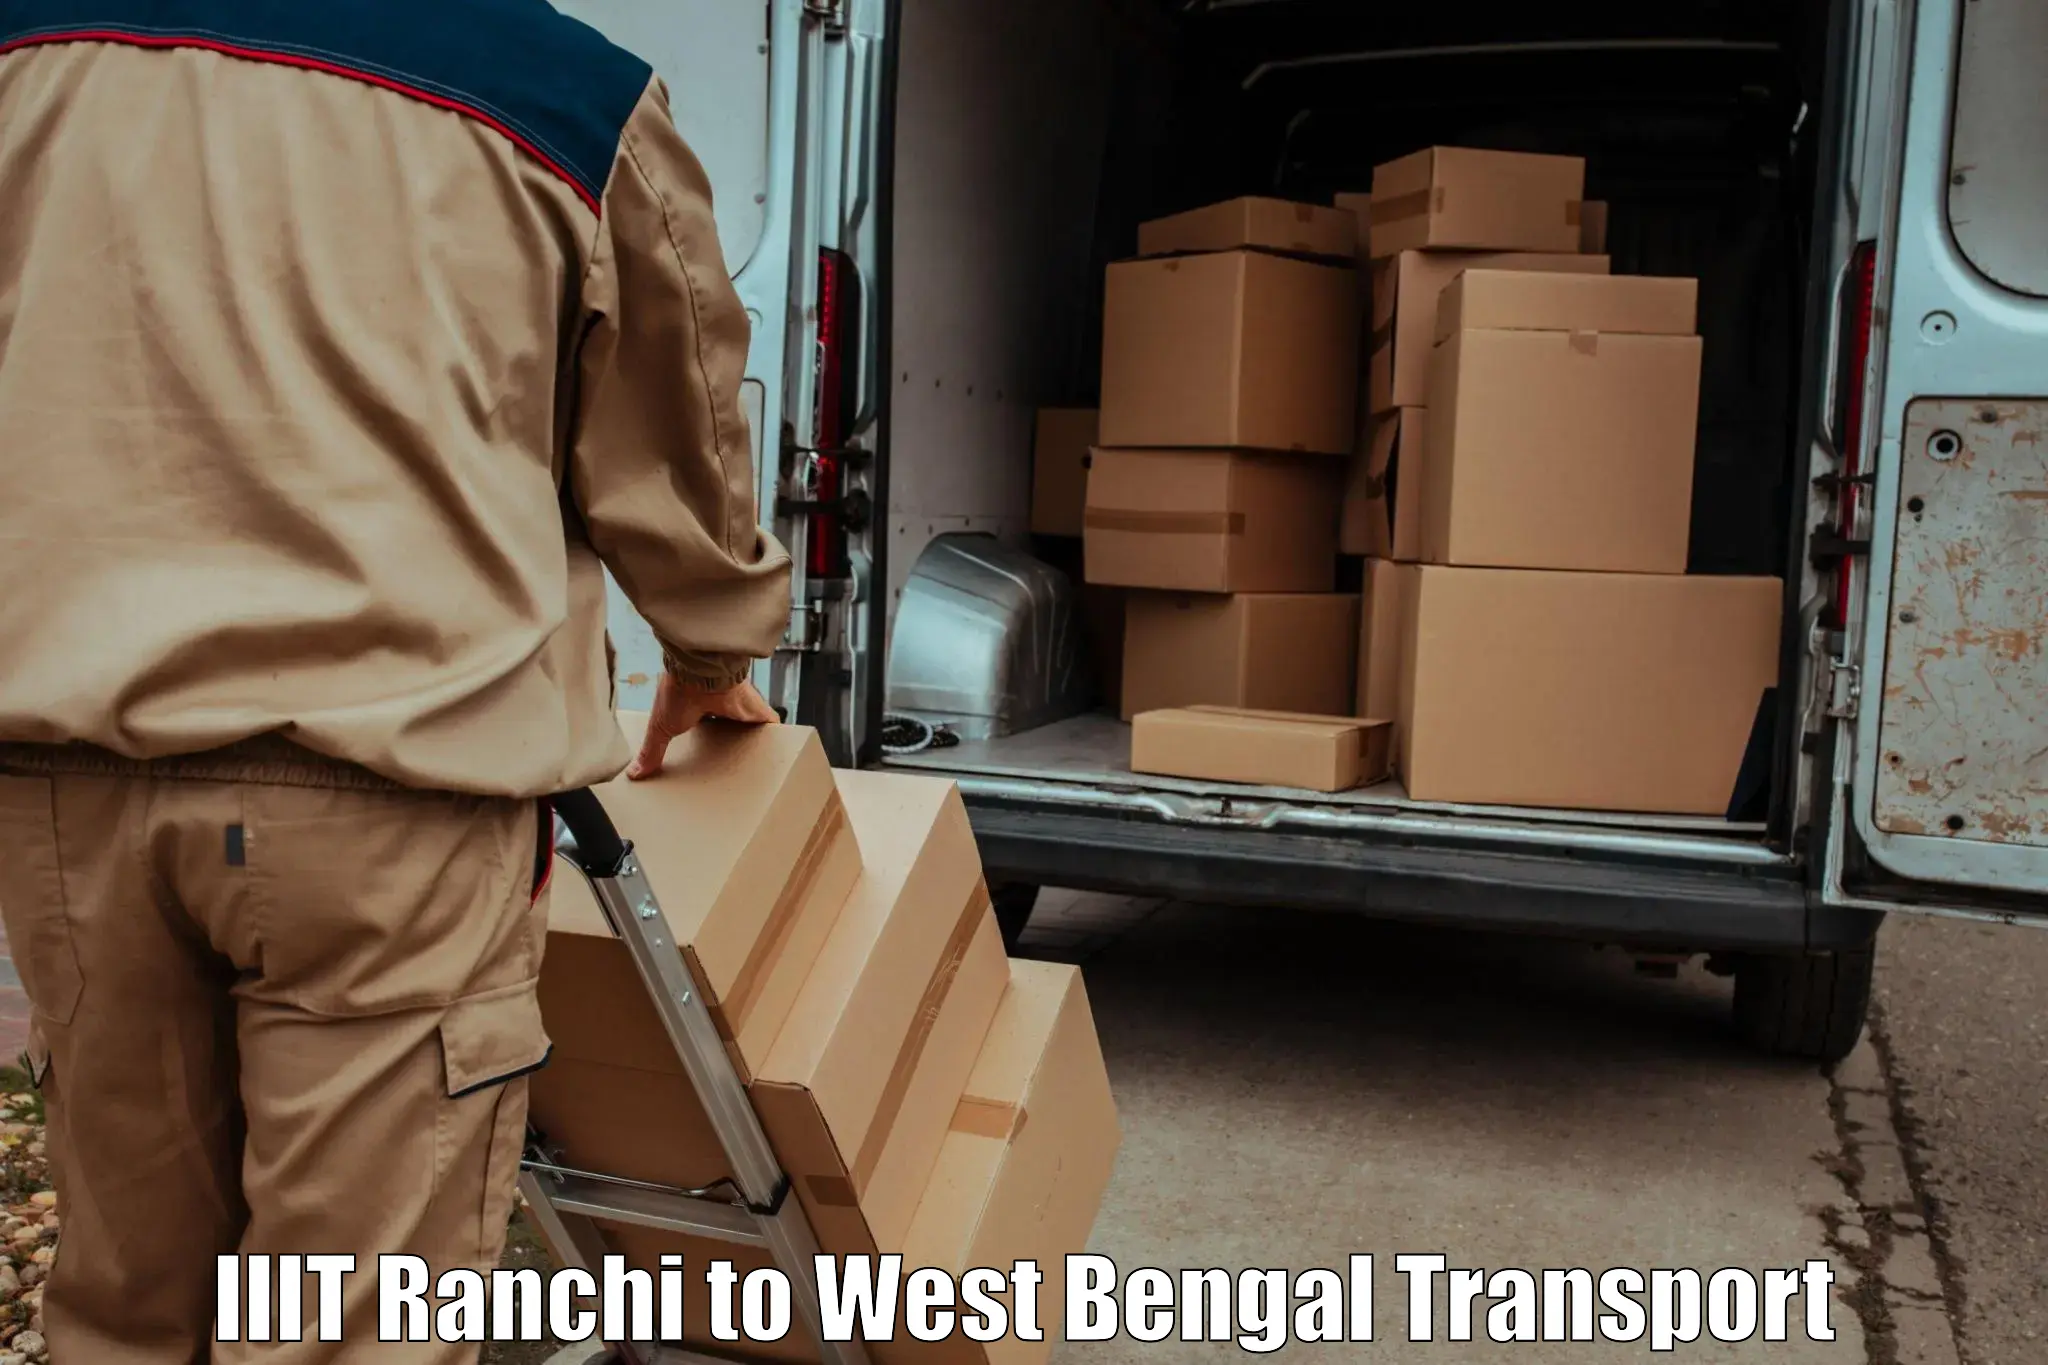 Pick up transport service in IIIT Ranchi to Raidighi